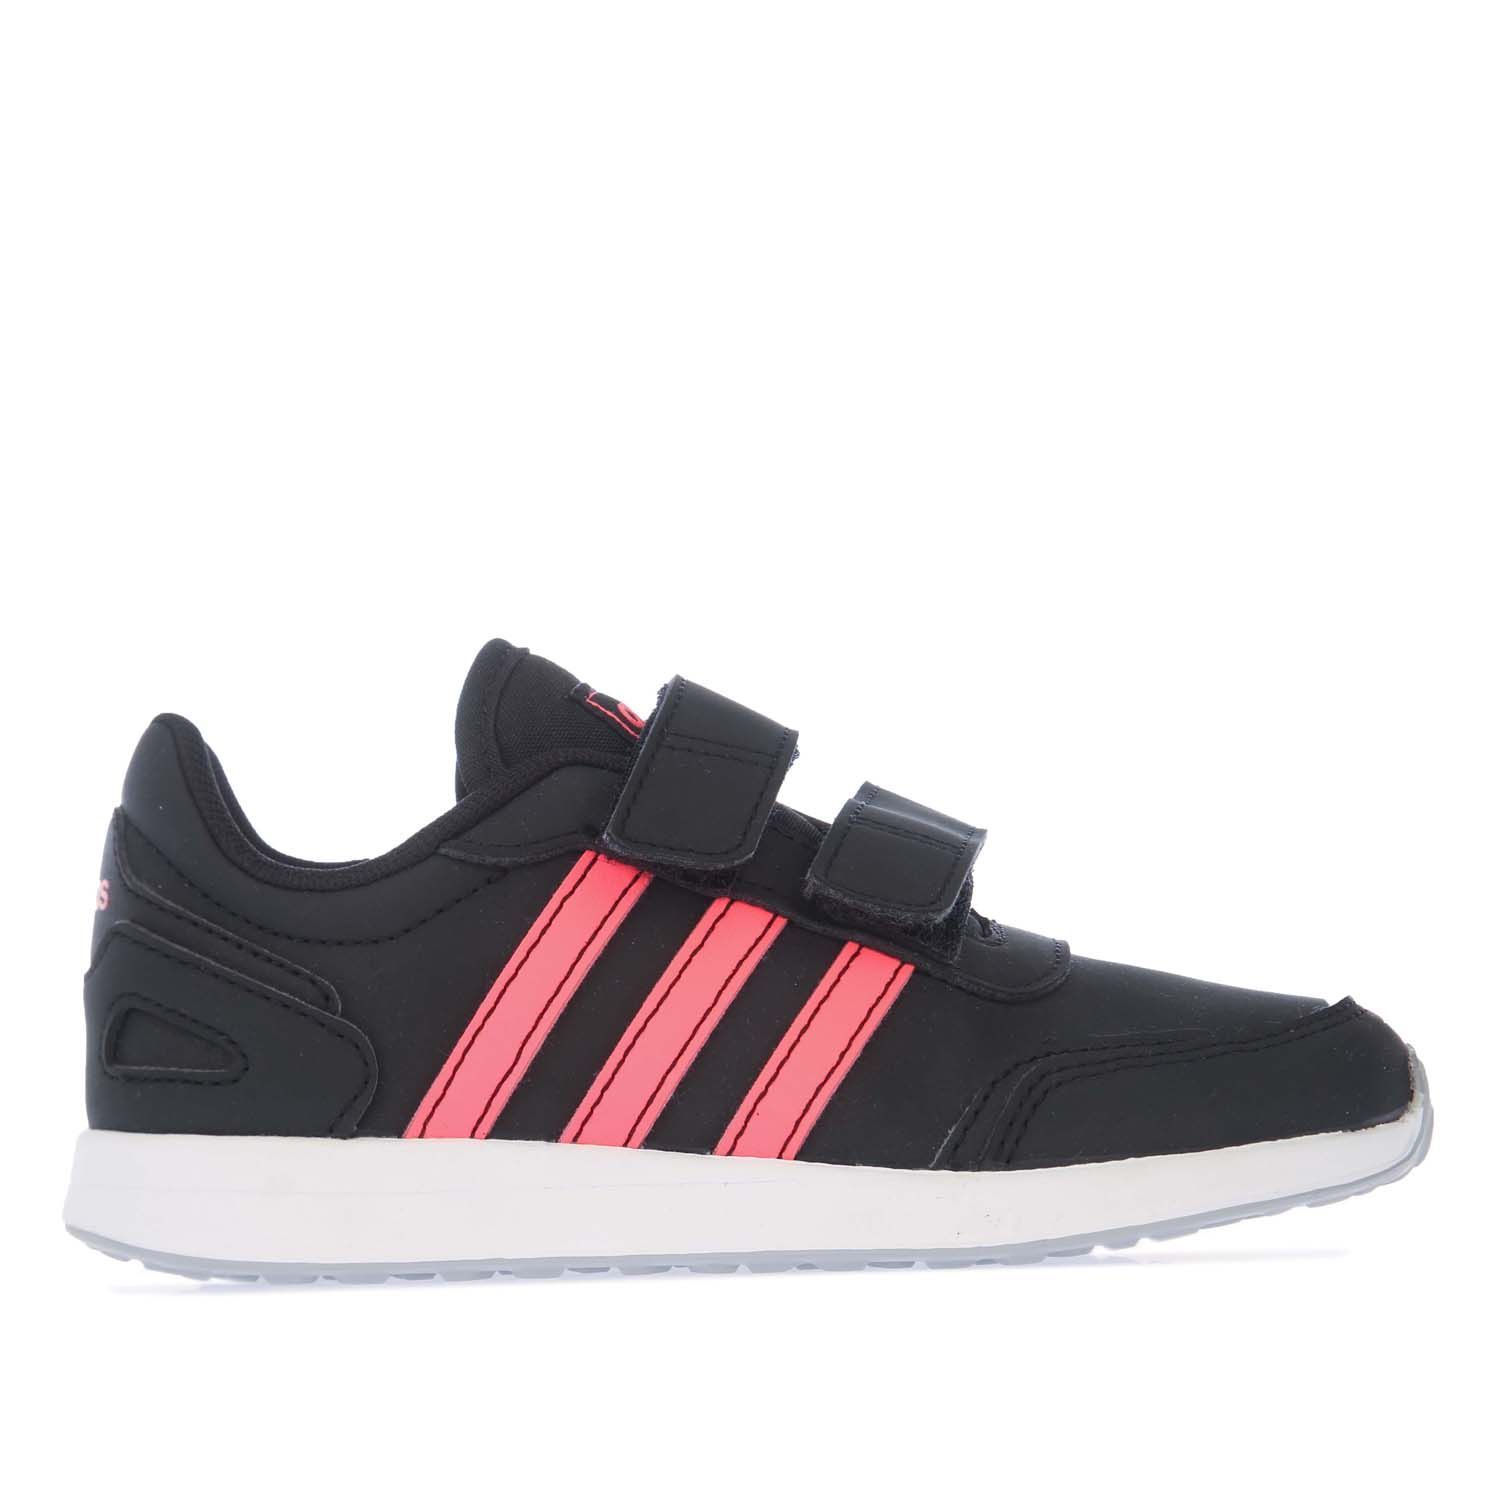 Childrens adidas VS Switch 3 Trainers in black pink.- Synthetic nubuck upper.- Hook-and-loop closure. - 3-Stripes added to the side. - adidas logo on the tounge and heel.- Cushioning midsole.- Rubber outsole.- Synthetic upper  Textile lining and sole.- Ref.: FW3982C